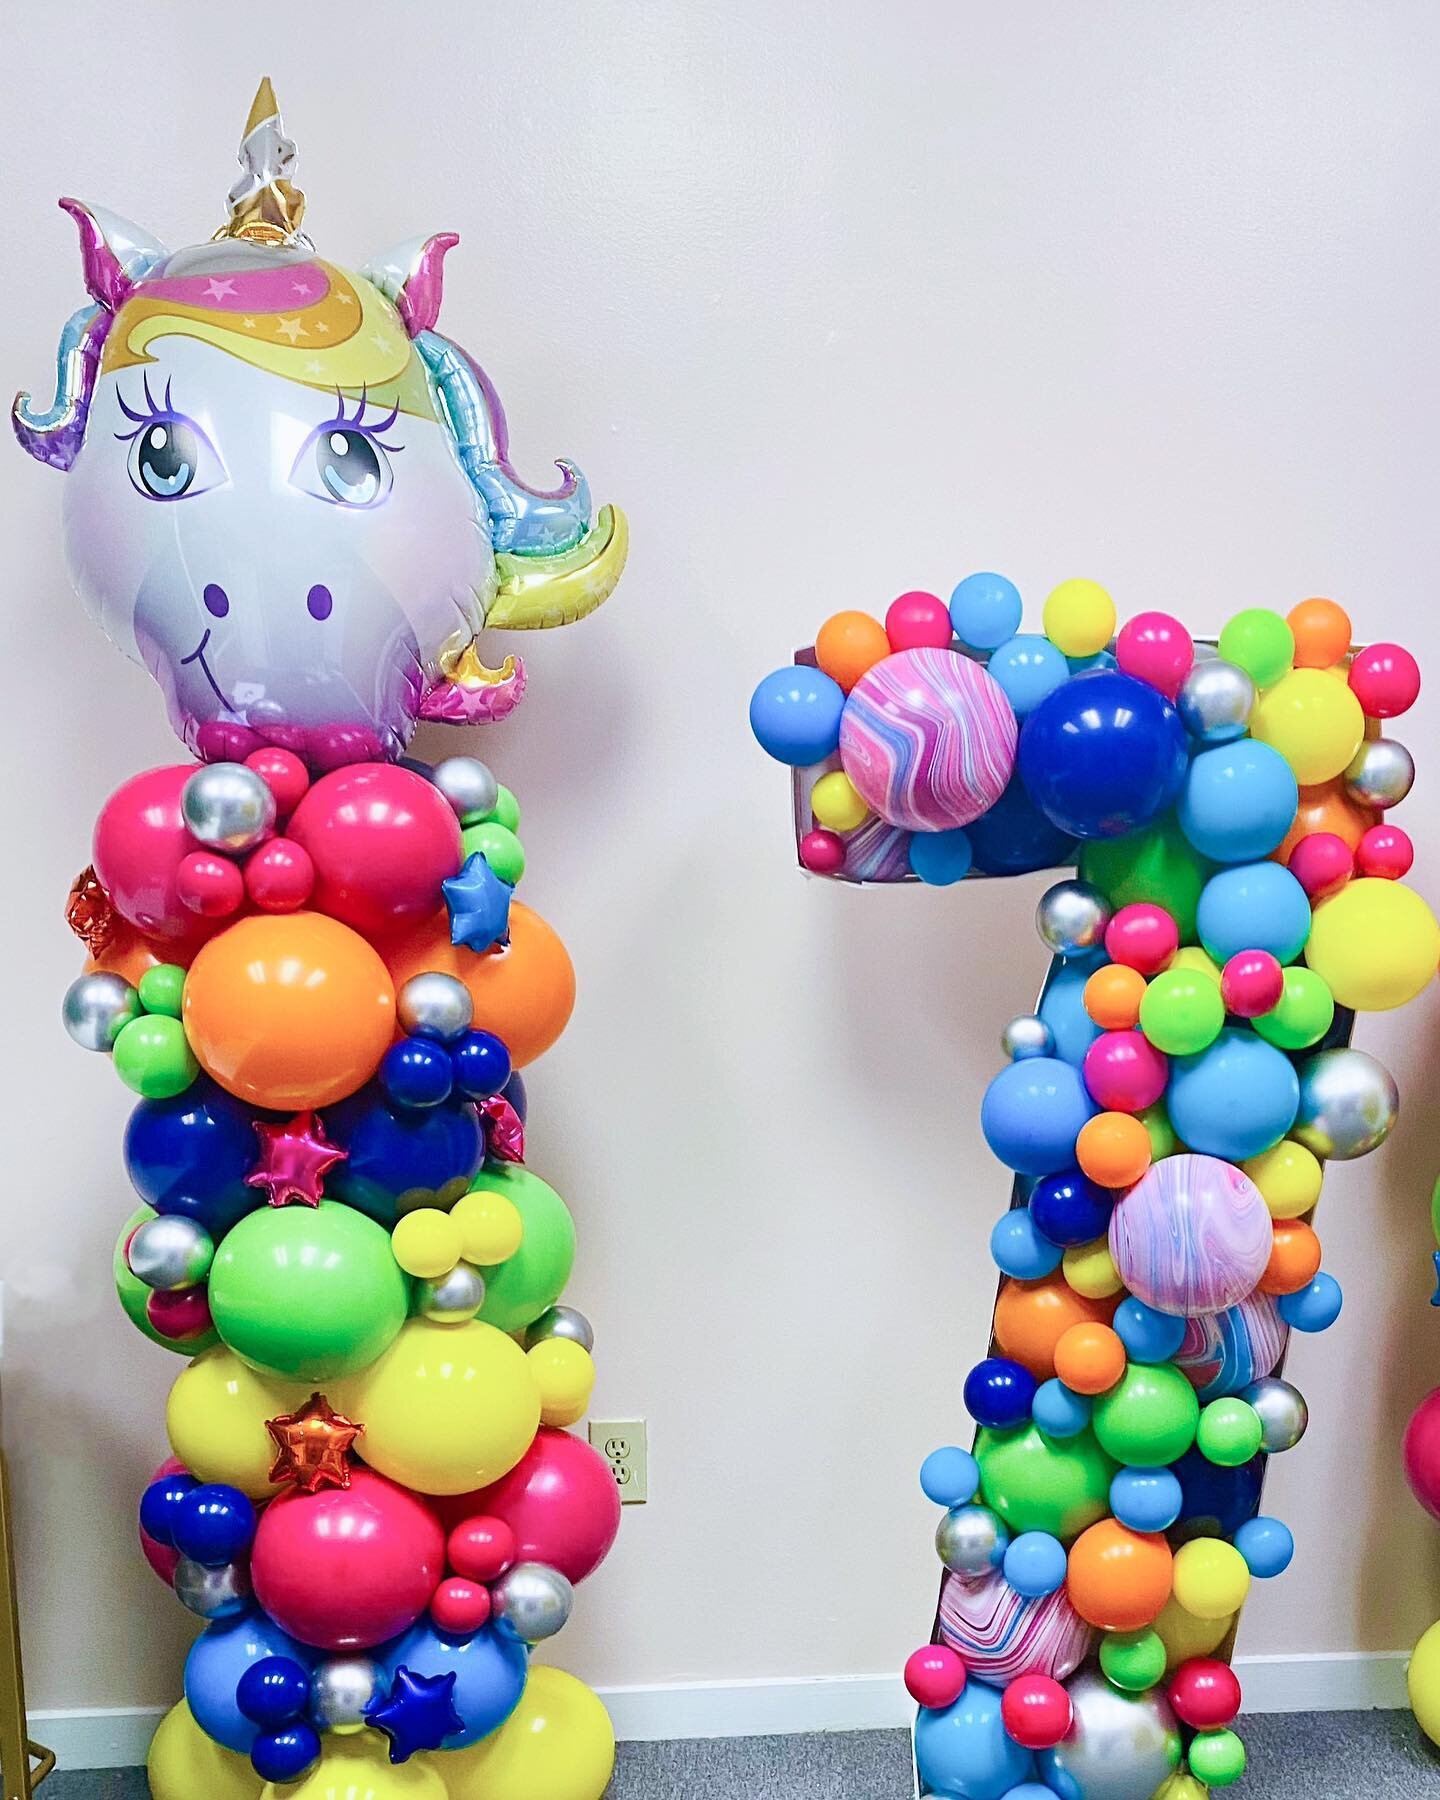 Unicorns and fairytales 🦄🌈🌸 

Ask about our balloon columns and mosaics deal. Ordering is easy. To book please visit www.Babaloonz.com or email info@babaloonz.com

601-760-9010